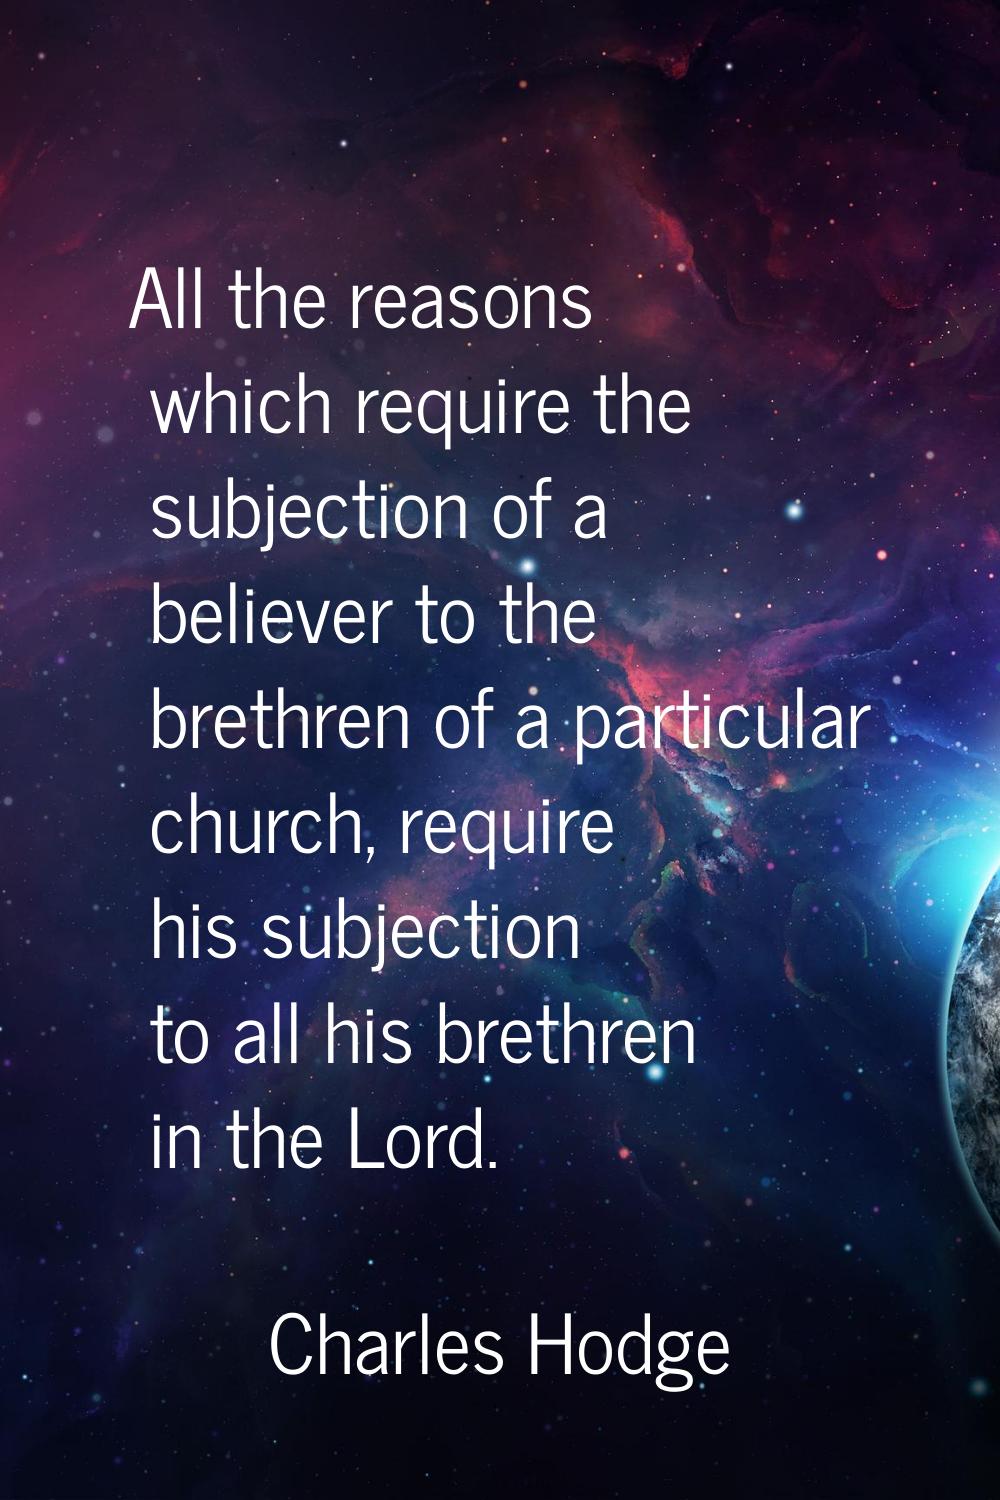 All the reasons which require the subjection of a believer to the brethren of a particular church, 